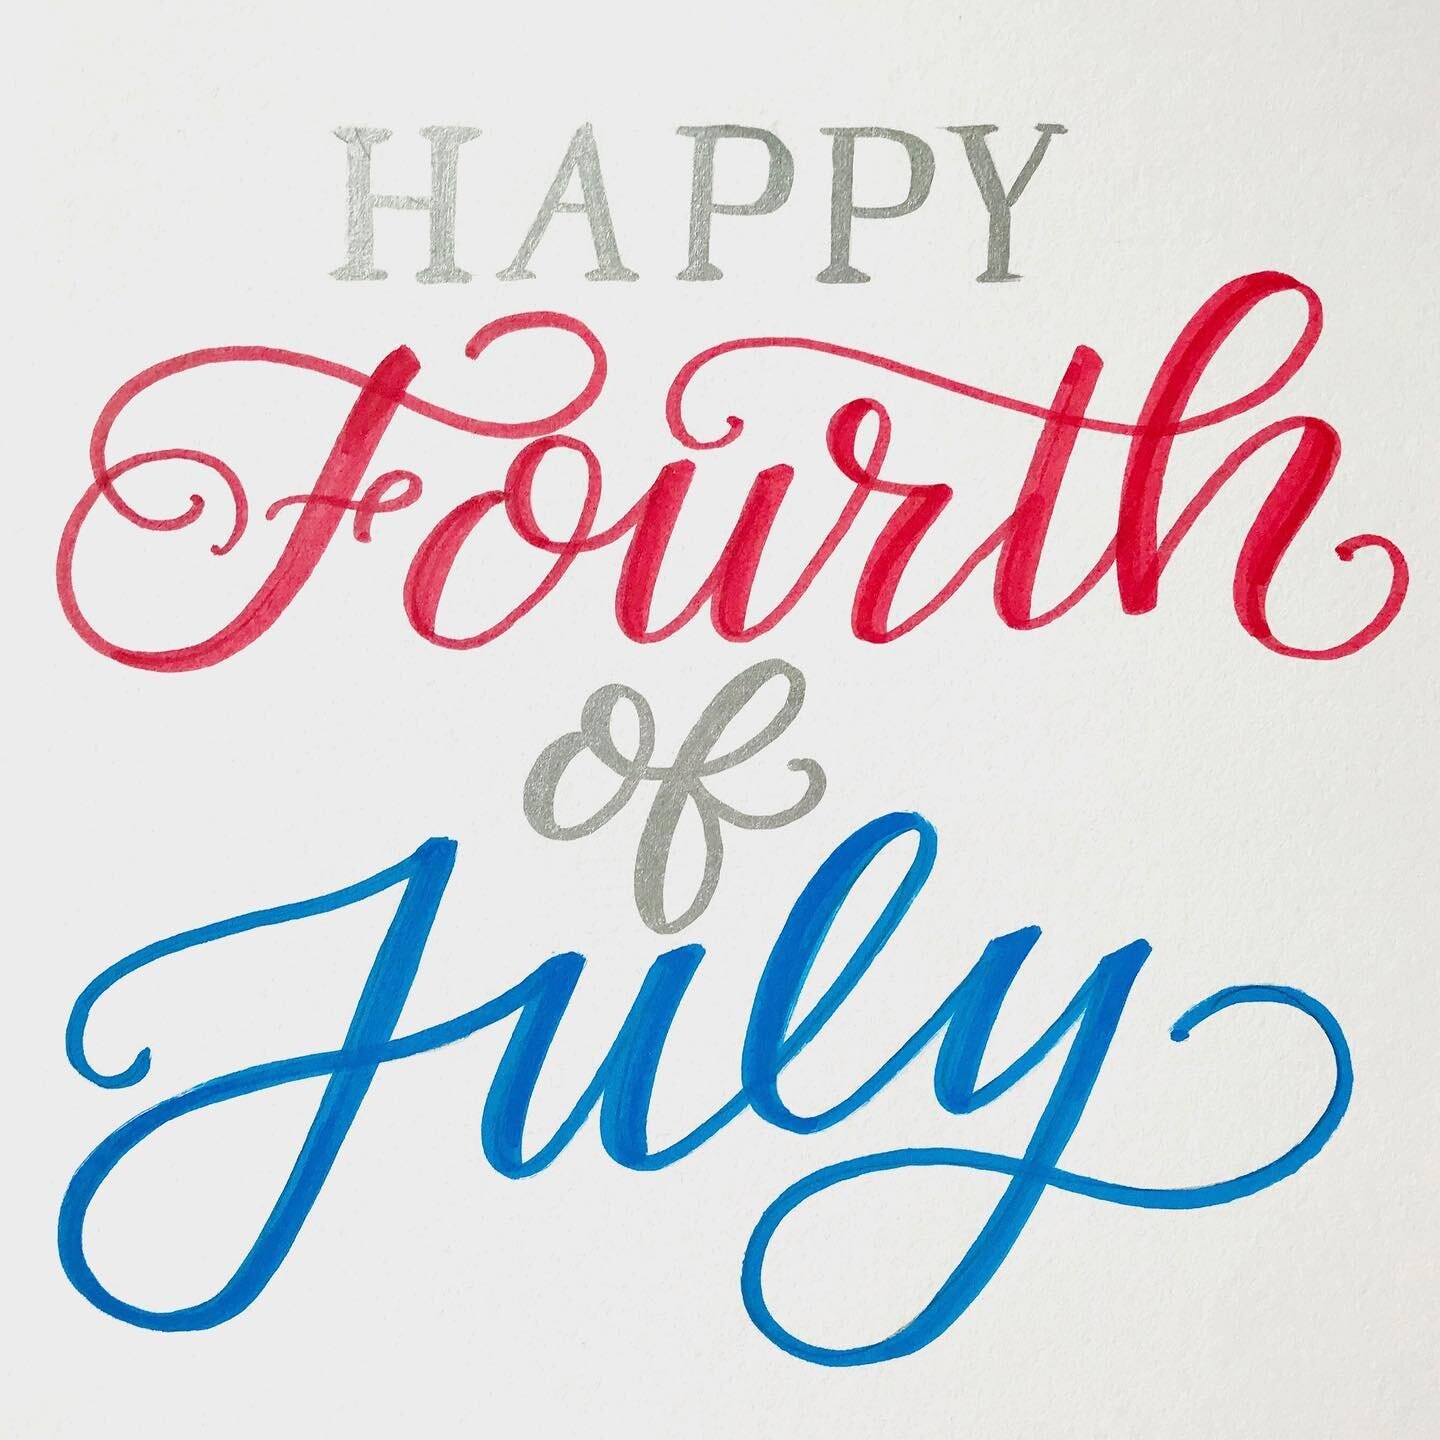 Wishing you a safe and fun 4th of July! 🇺🇸

❤️
🤍
💙
❤️
🤍
💙

#calligraphycommunity #letteringcommunity #calligraphyinspired #letteringlife #calligraphic #modernletters #modernhandlettering #handwrittenfont #letteringlovers #letteringdaily #lifeis